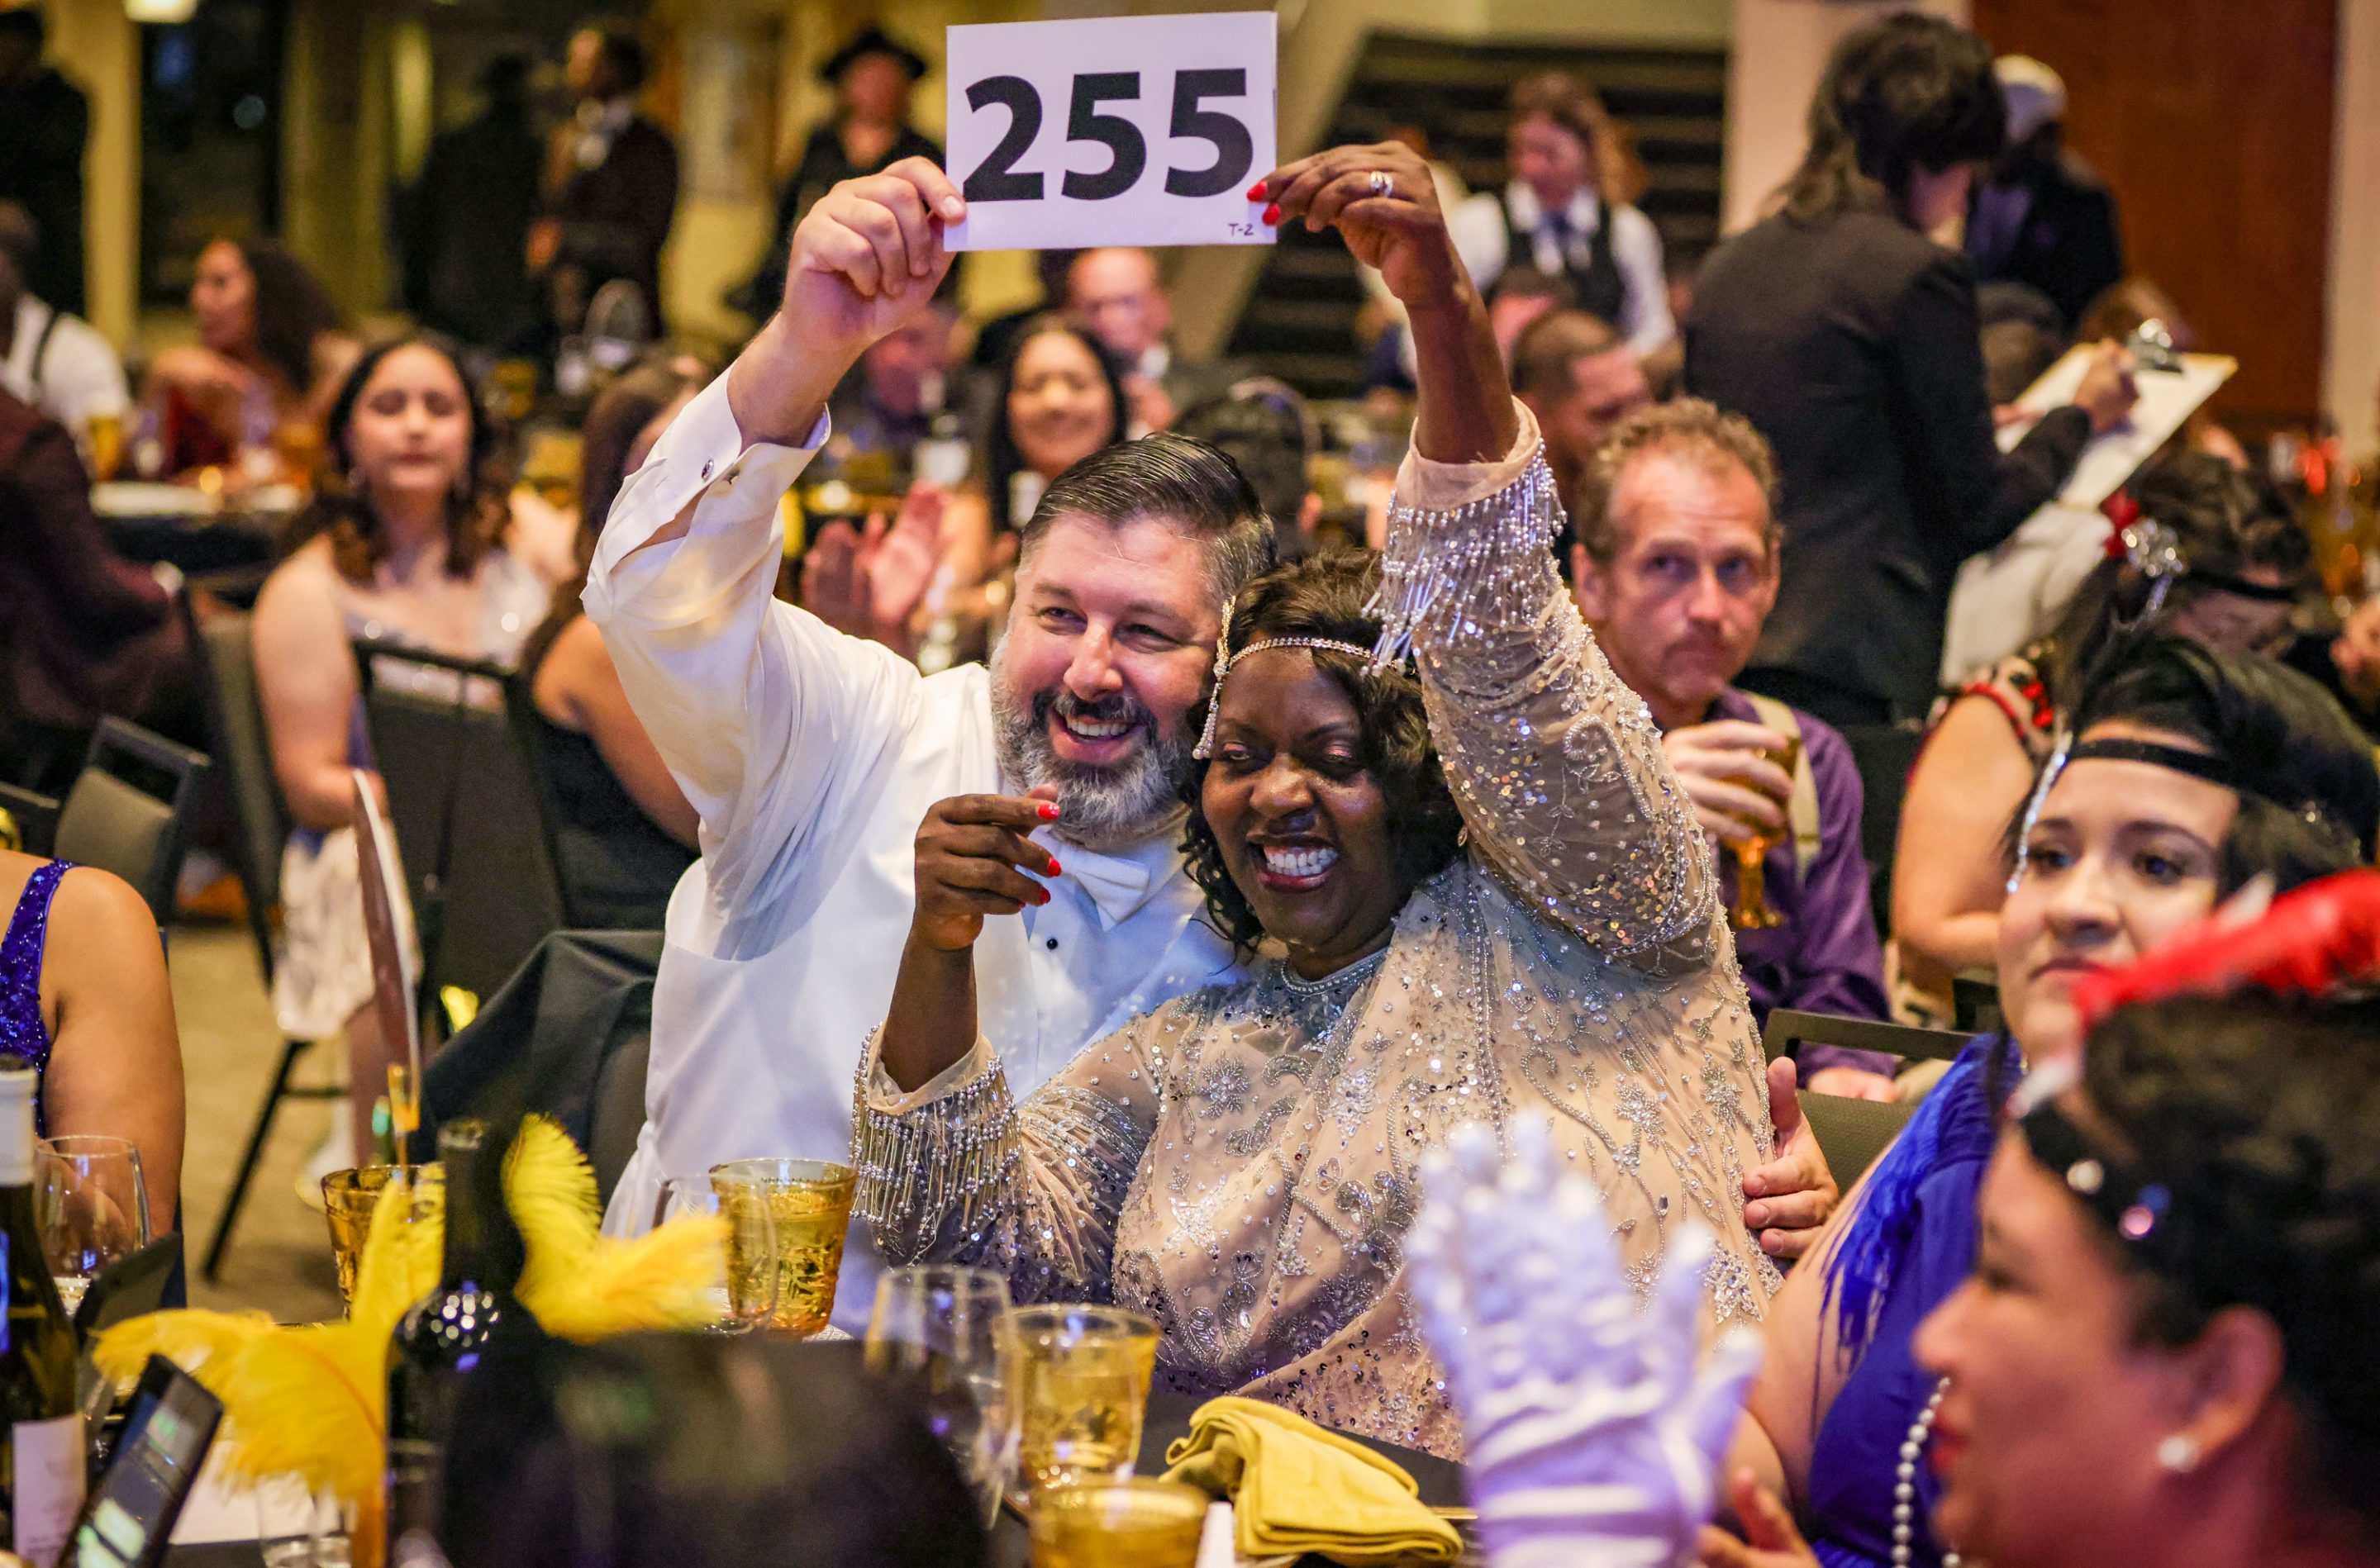 A group of people holding up a number at a dinner hosted by The LIME Foundation of Santa Rosa, a Sonoma County Non-Profit Organization.